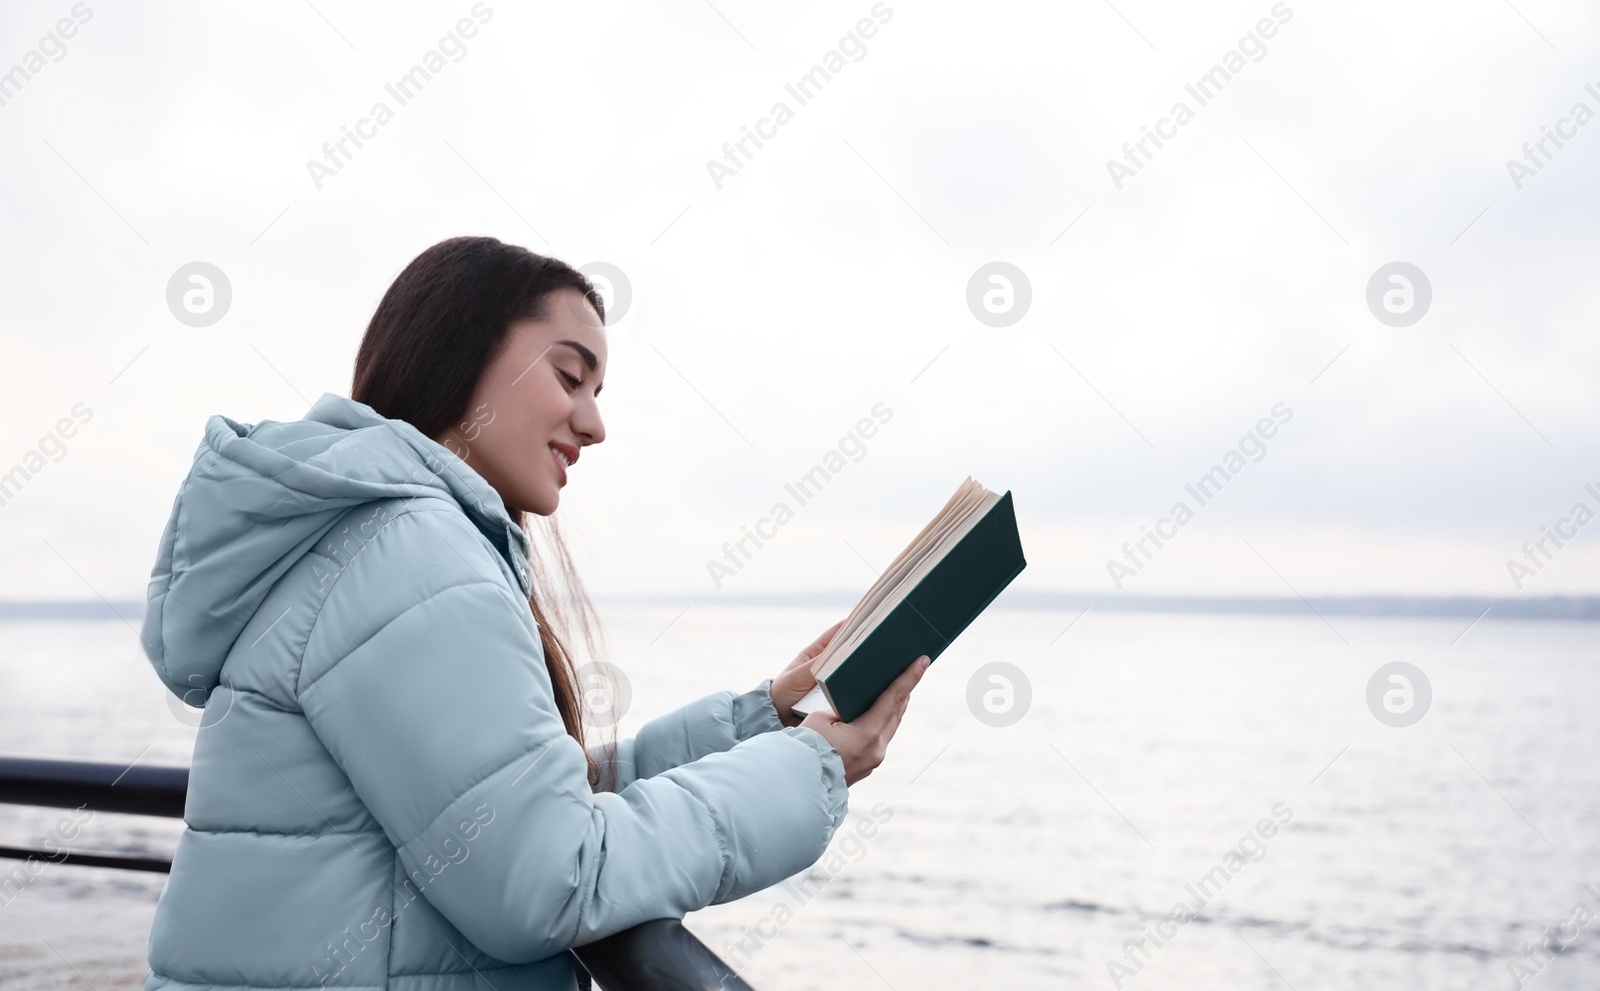 Photo of Woman reading book near river on cloudy day